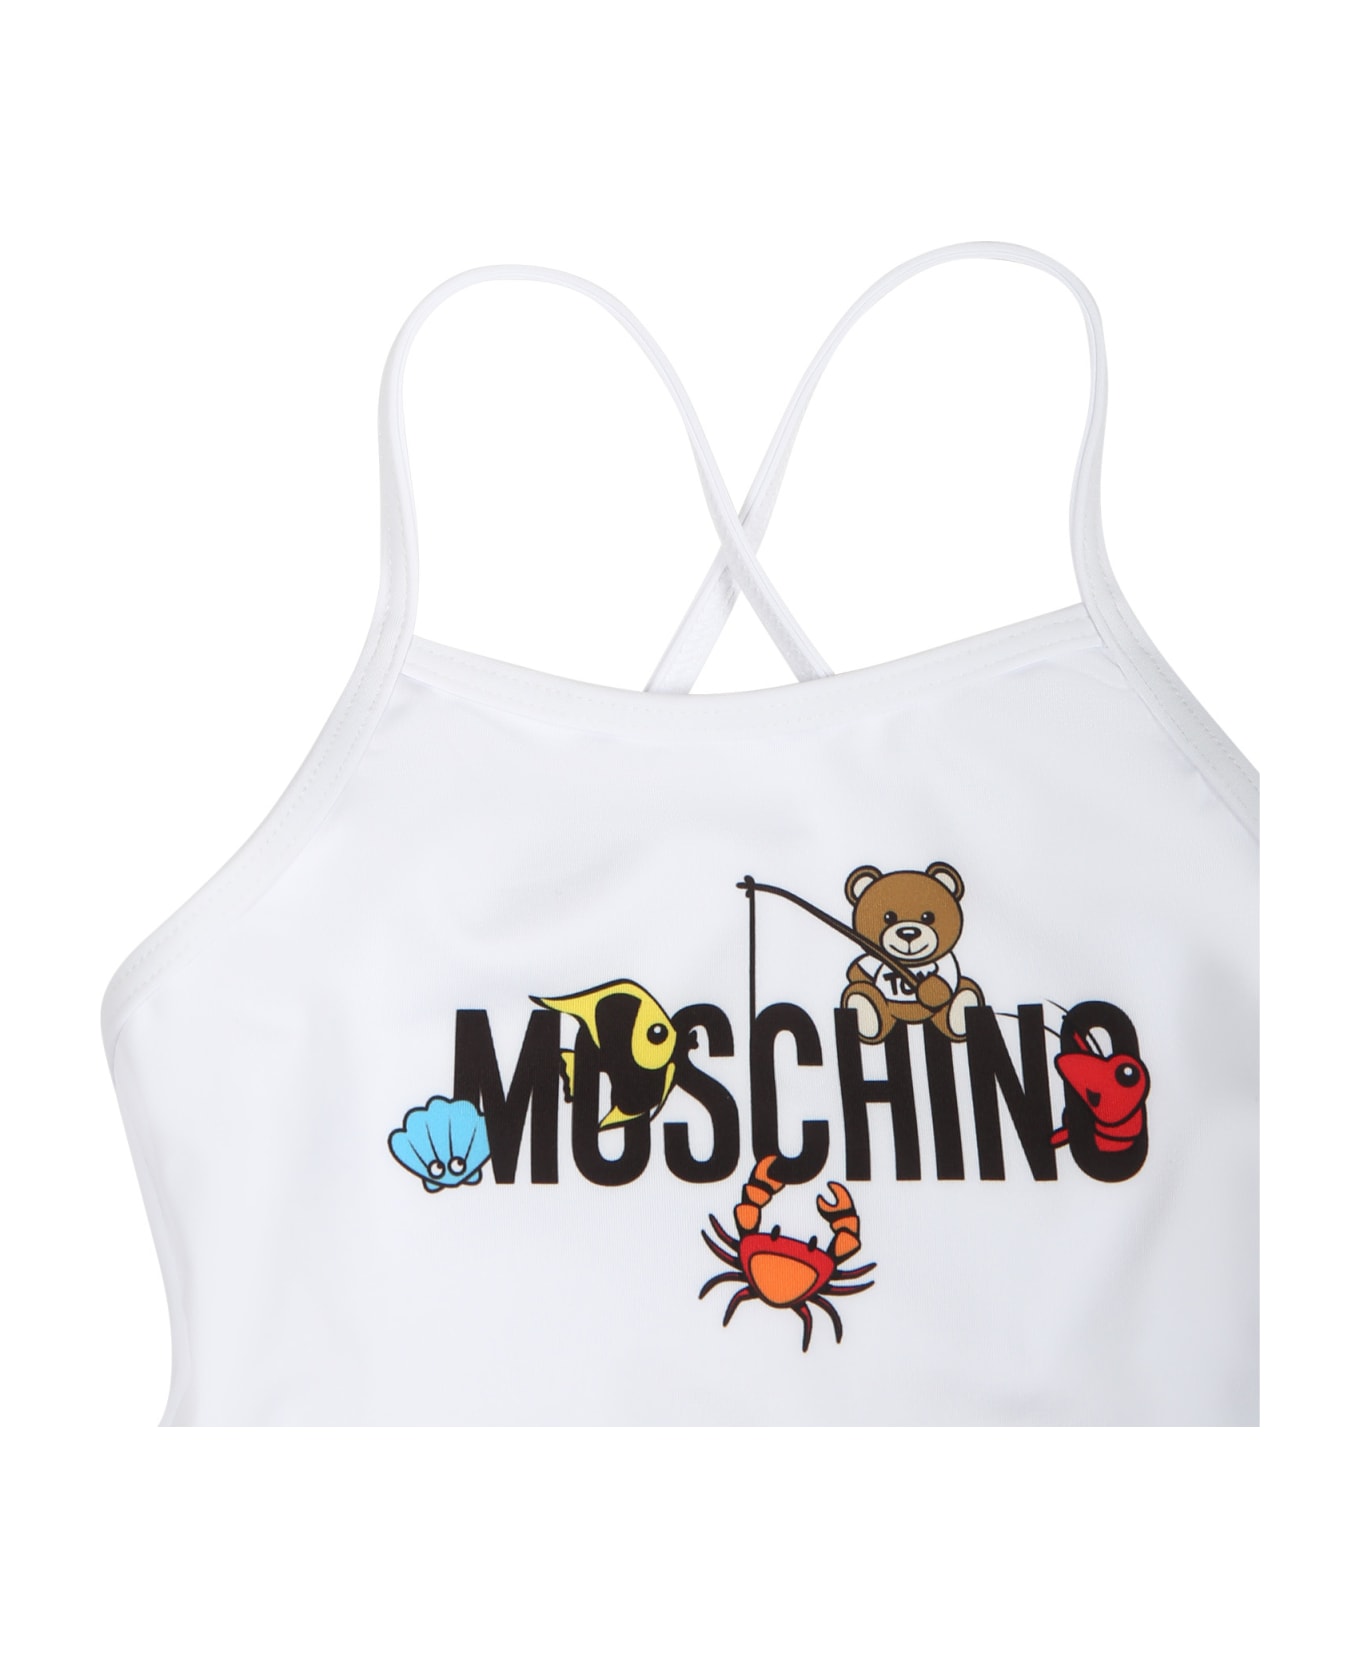 Moschino White One Piece Swimsuit For Baby Girl With Logo - White 水着